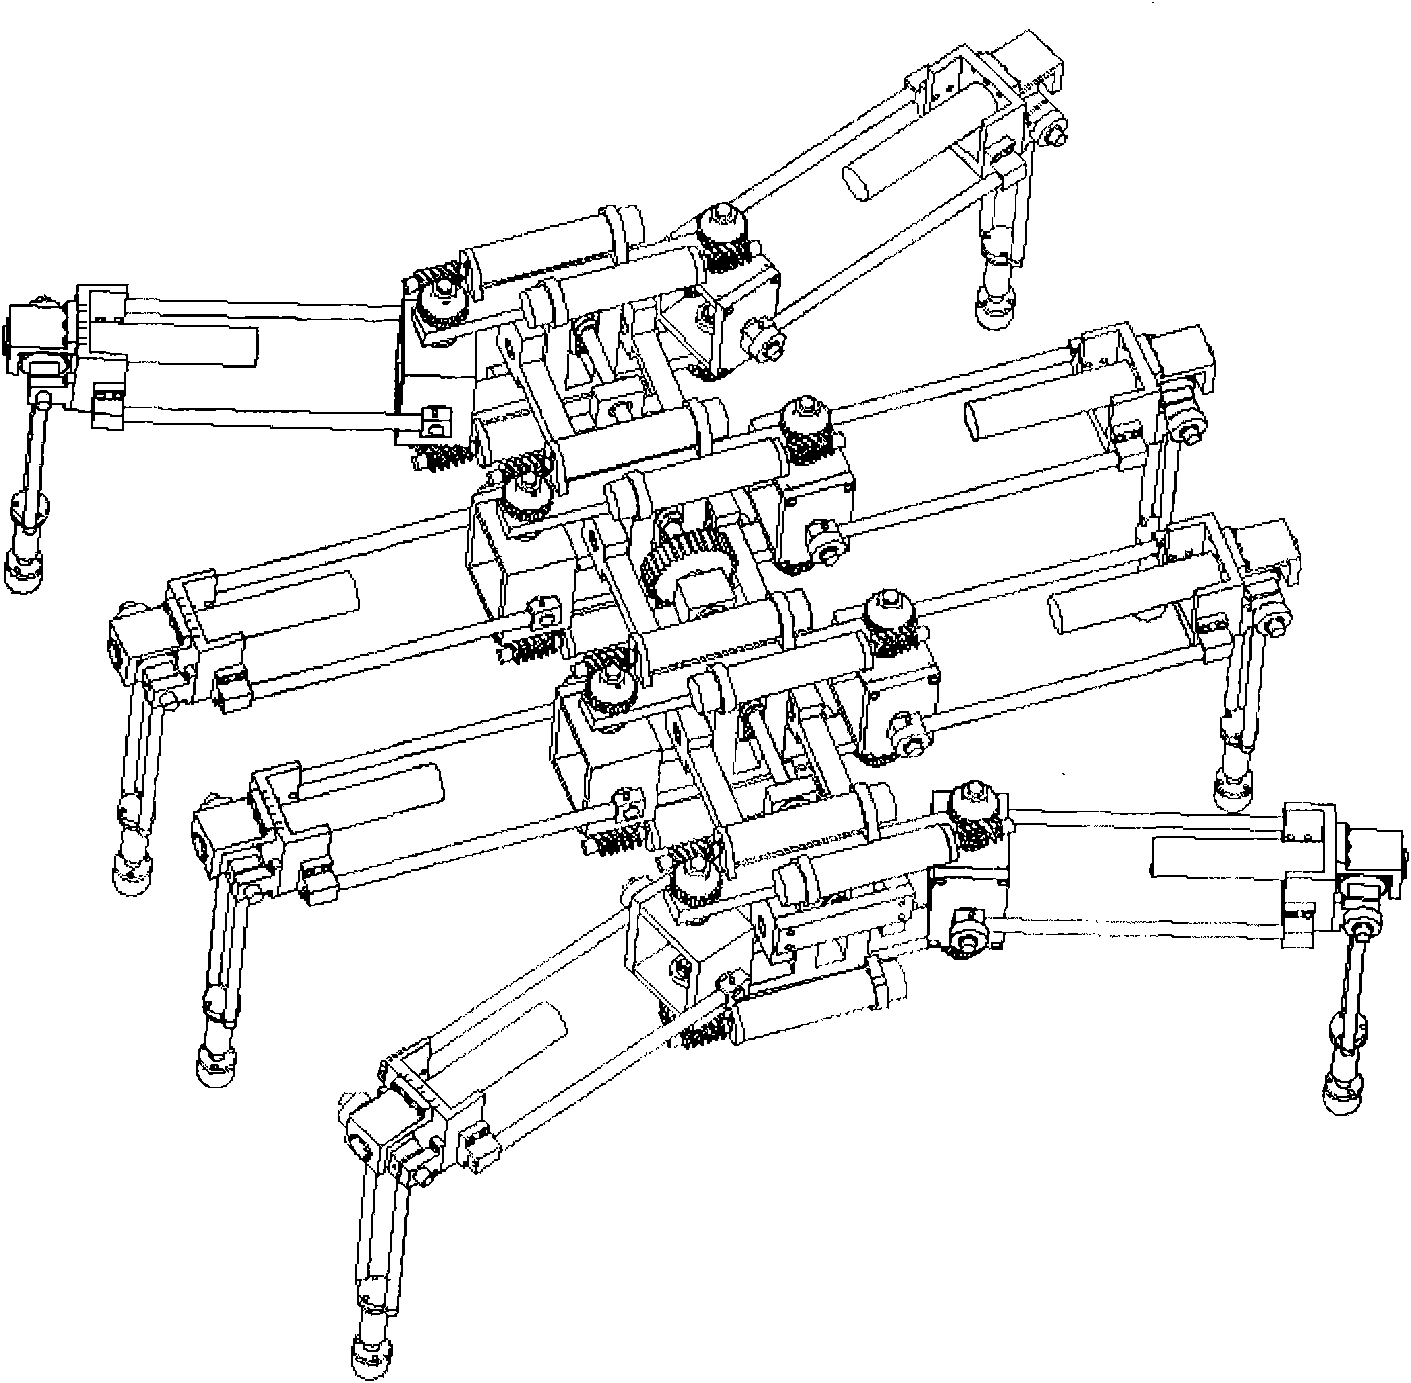 Reversible and amphibious multi-legged robot with variable postures